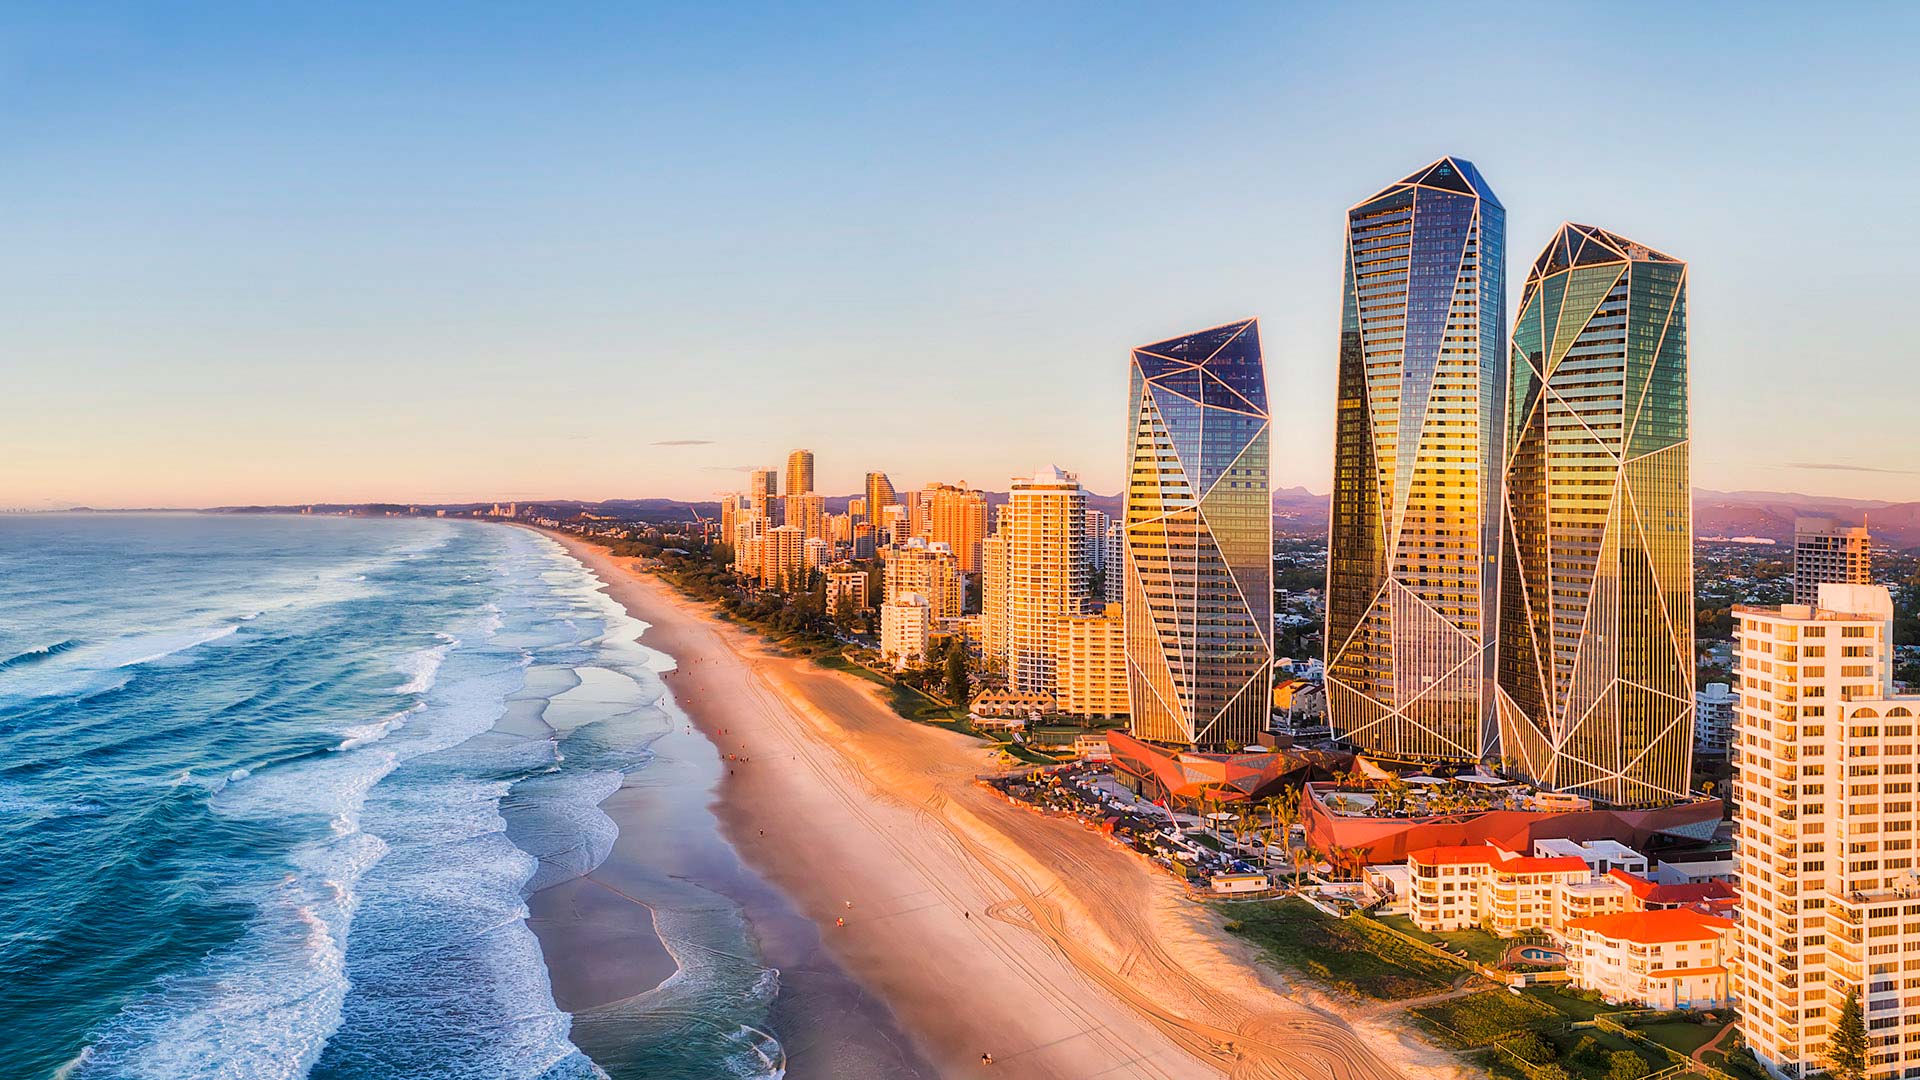 Panorama to illustrate dating in gold coast